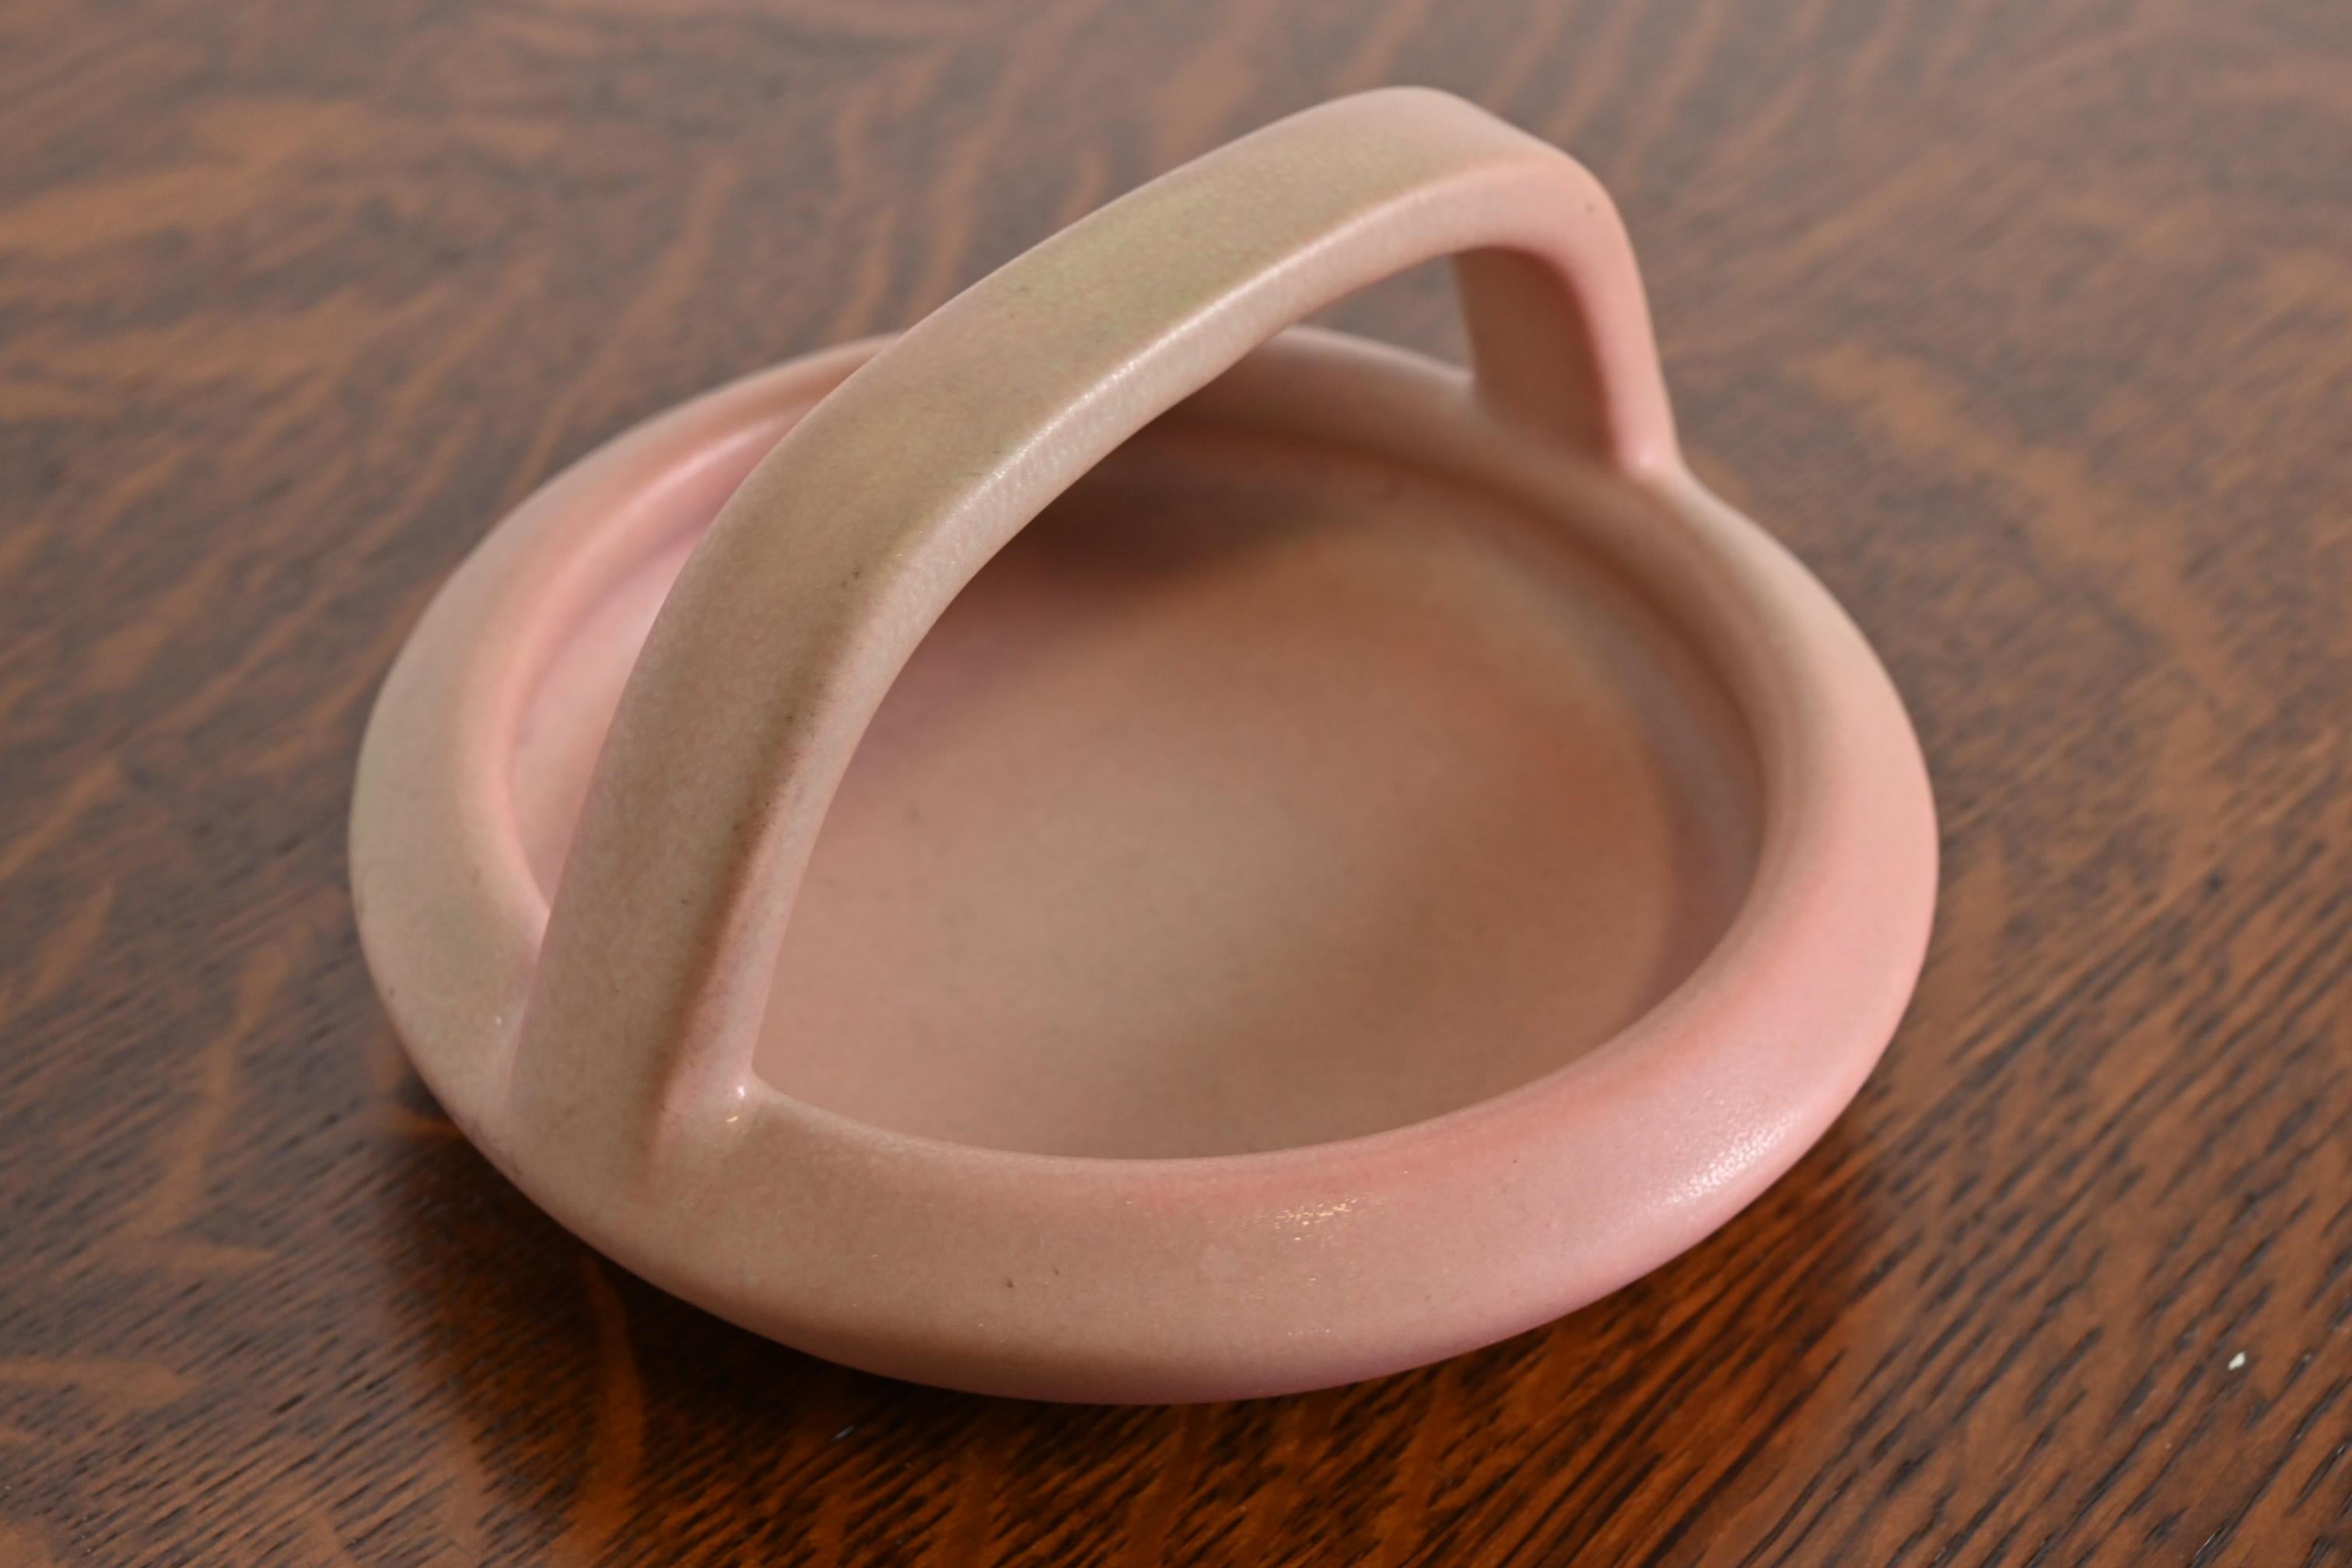 American Rookwood Pottery Arts & Crafts Glazed Ceramic Pink Handled Bowl or Ashtray, 1919 For Sale